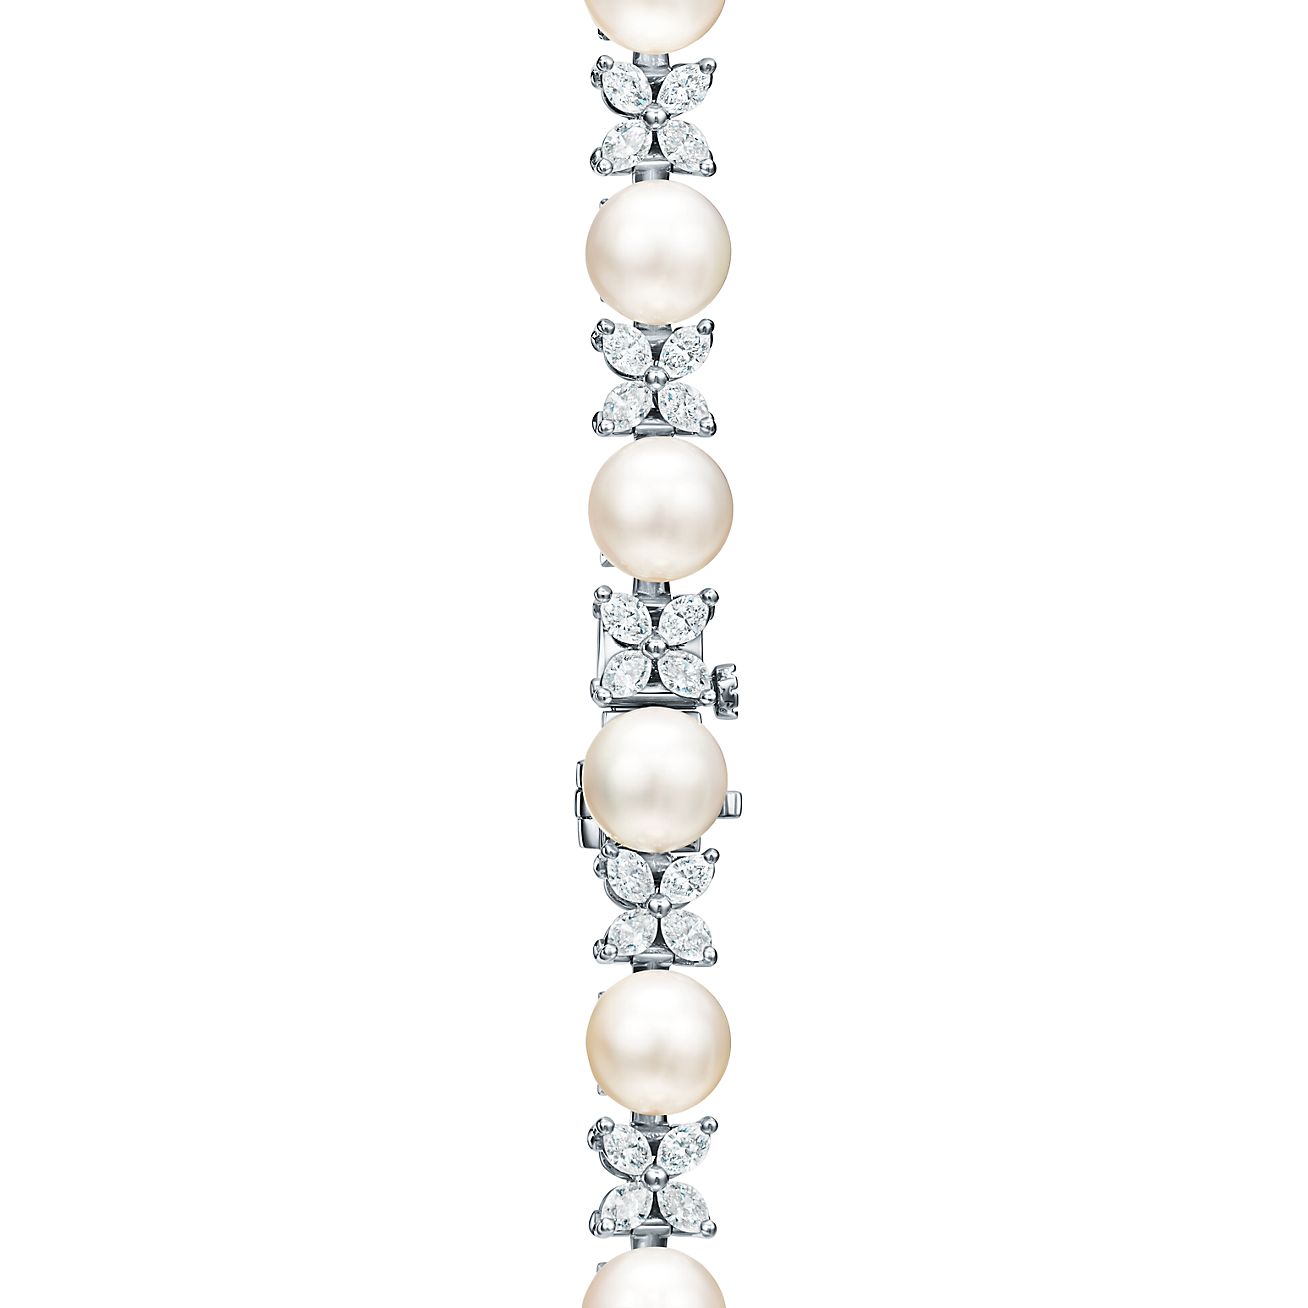 Tiffany Victoria Tennis Bracelet in Platinum with Diamonds and Pearls